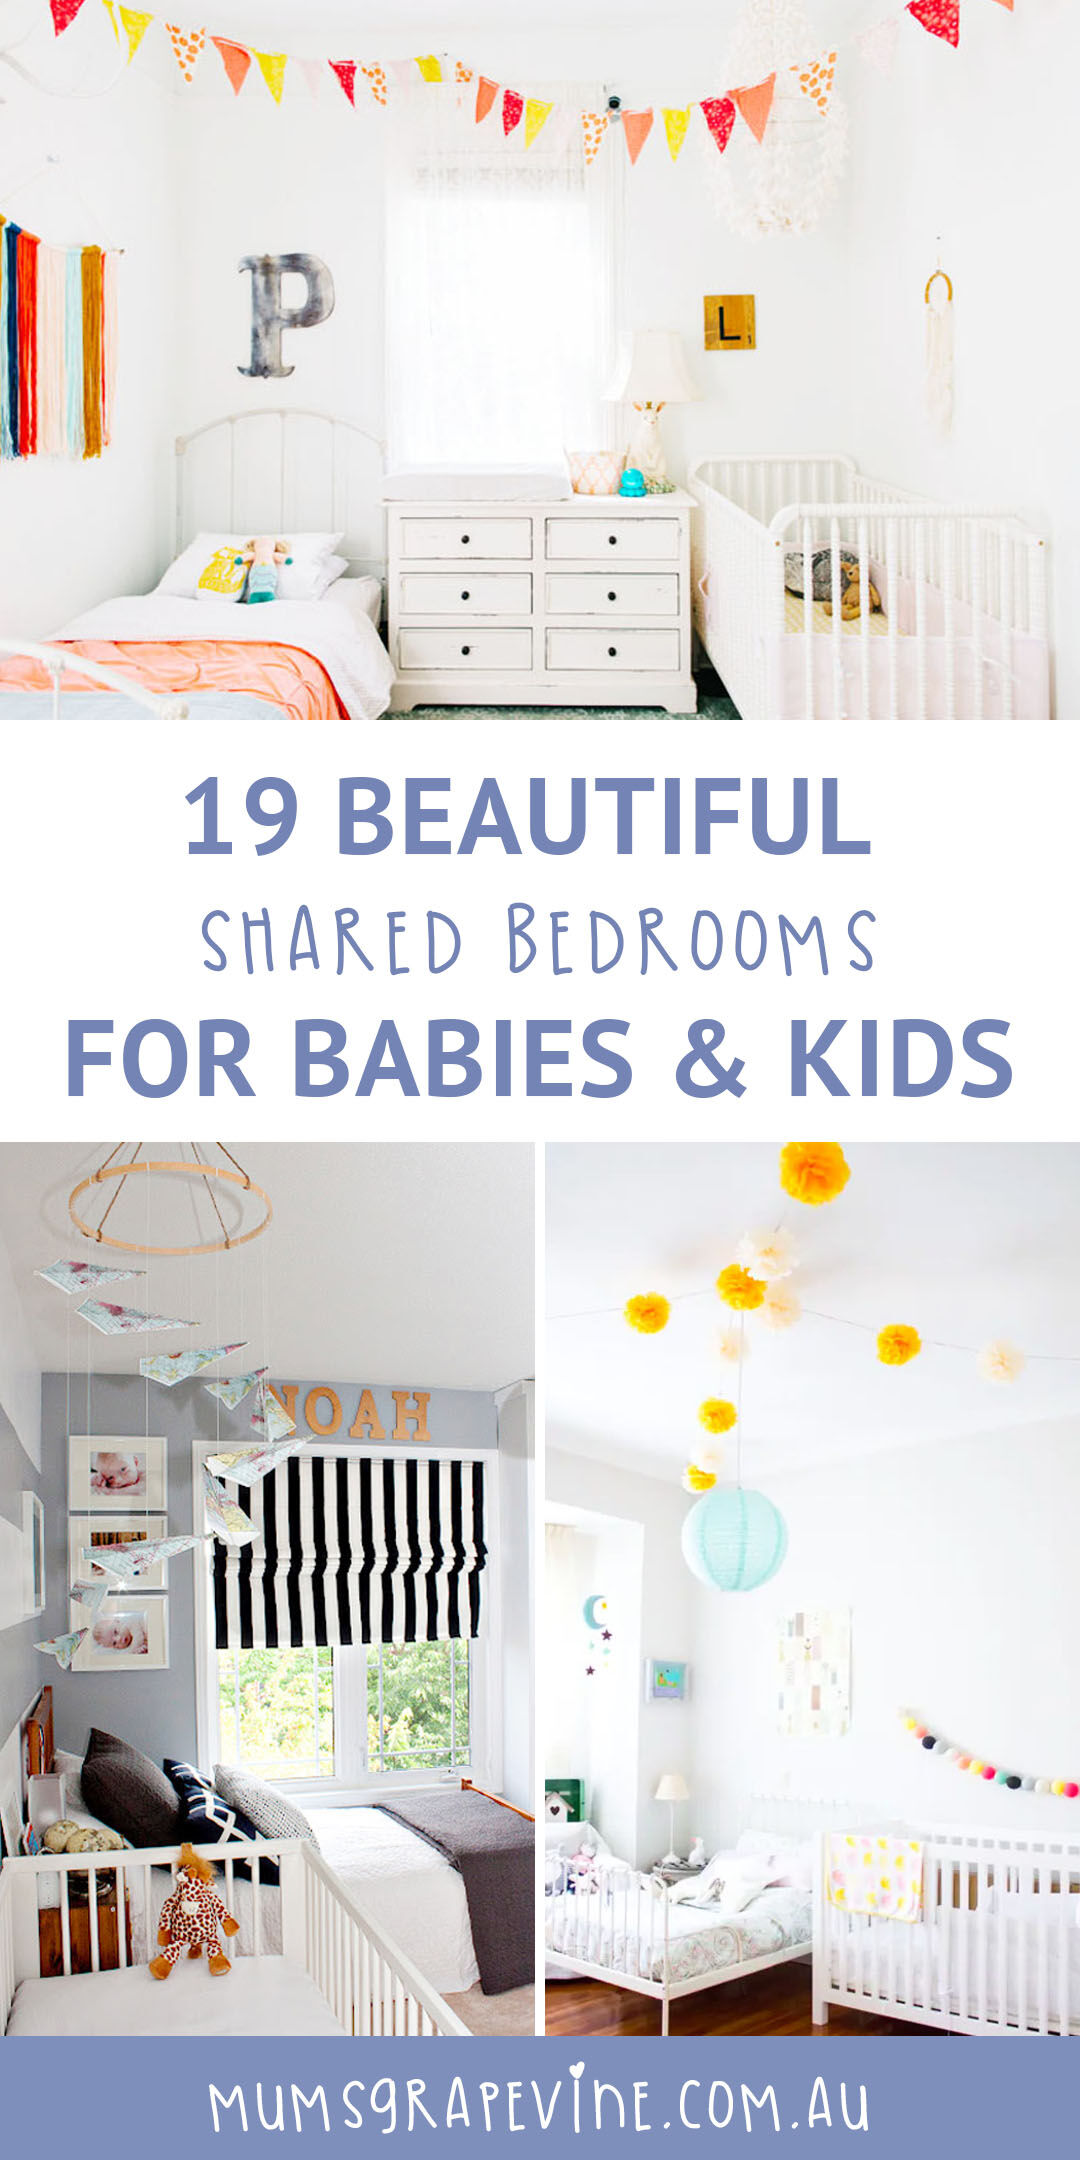 12 beautiful shared bedroom ideas for babies and kids